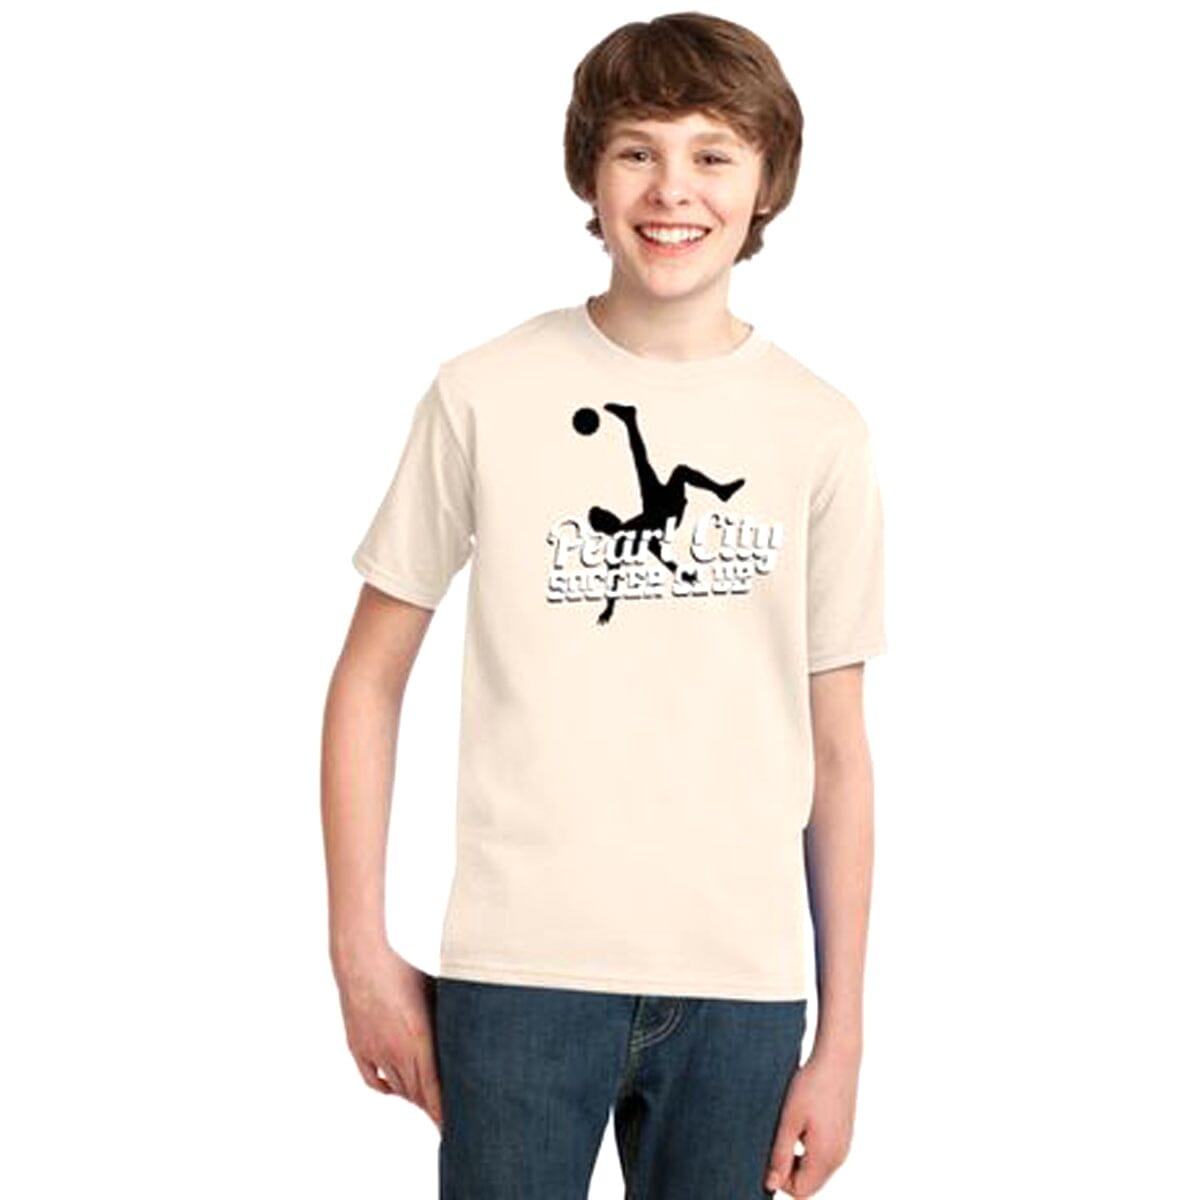 Pearl City Soccer Club Youth Essential Tee Essential Tee Goal Kick Soccer Youth X-Small Natural 